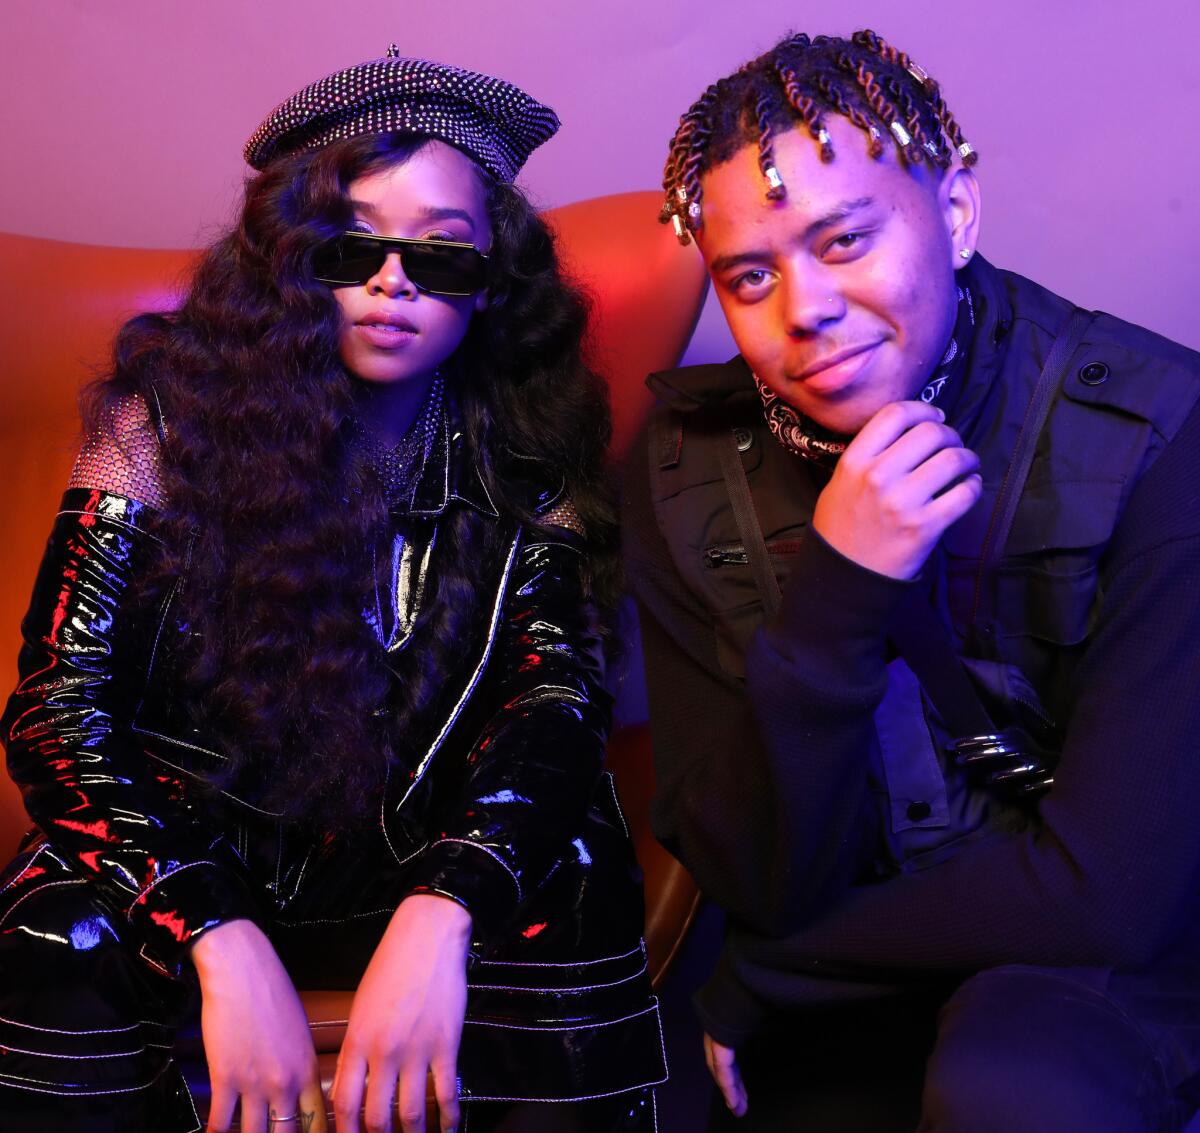 Duet partners H.E.R. and YBN Cordae at the 2019 BET Awards on June 23 in L.A.